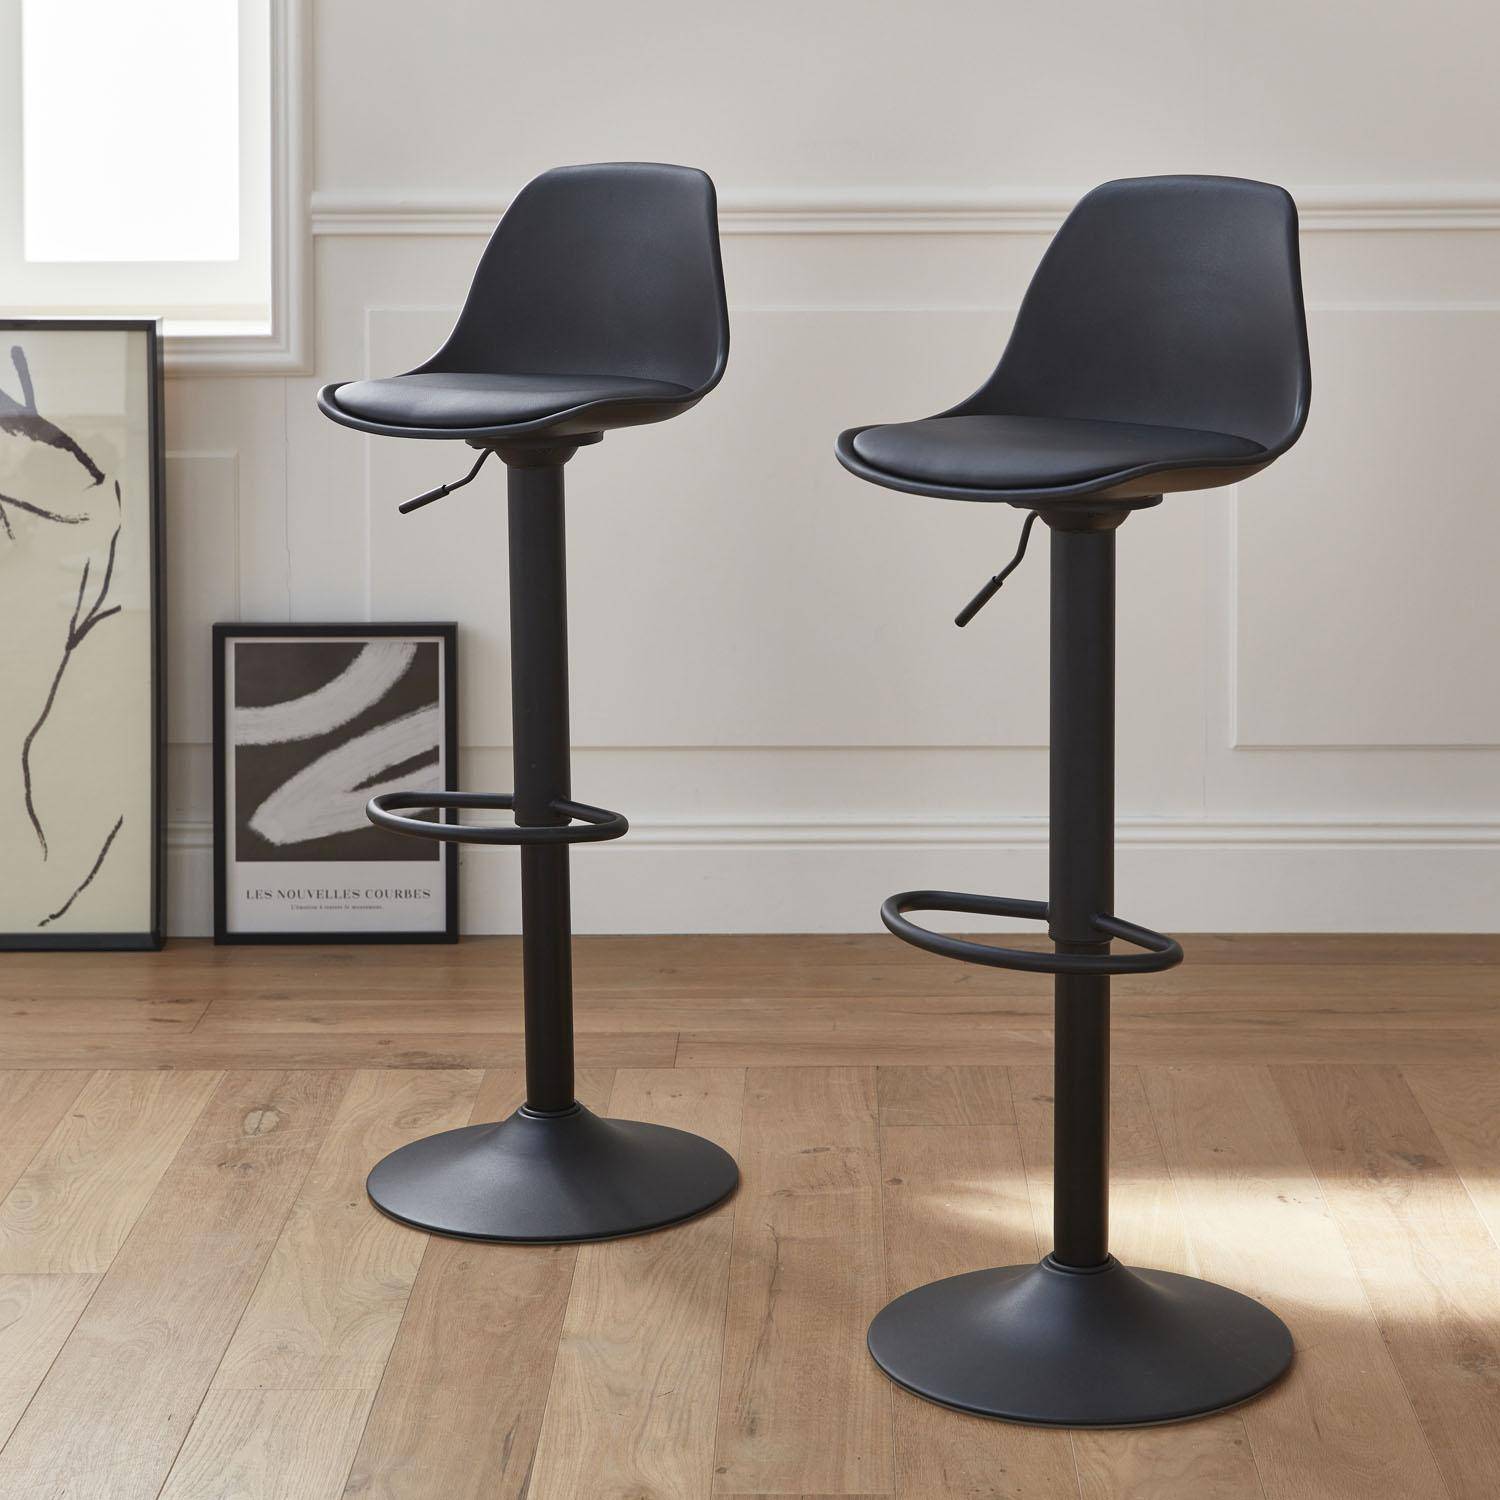 Pair of faux leather, rounded backrest, adjustable bar stools, seat height 61.5 - 83.5cm - Noah - Black Photo1